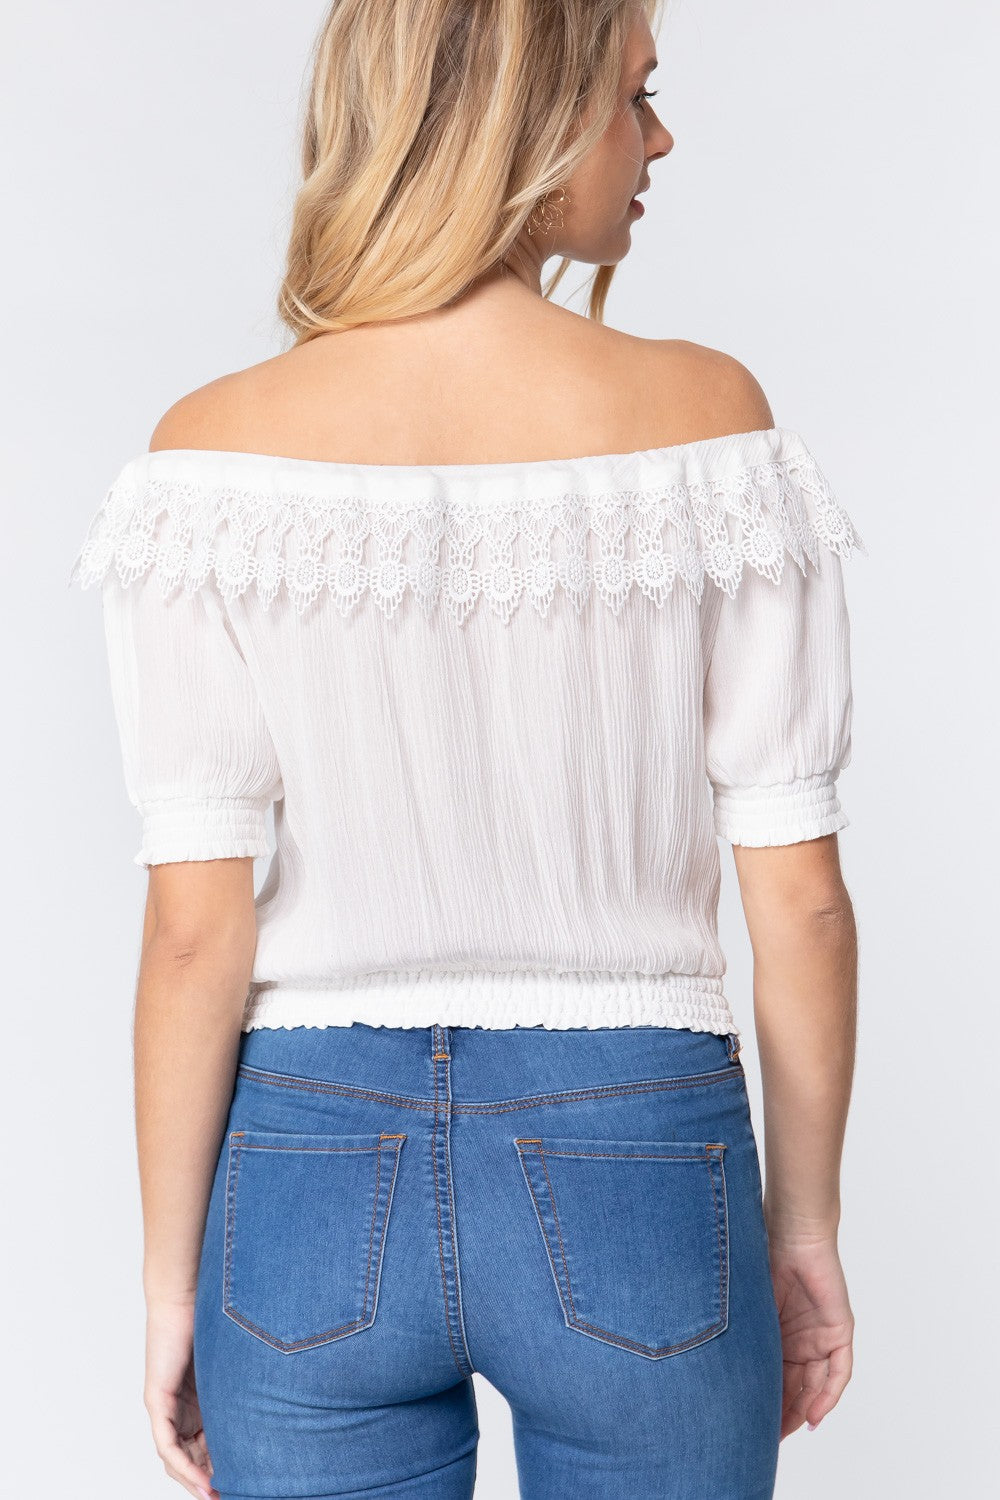 Off White Off Shoulder Lace Detailed Top